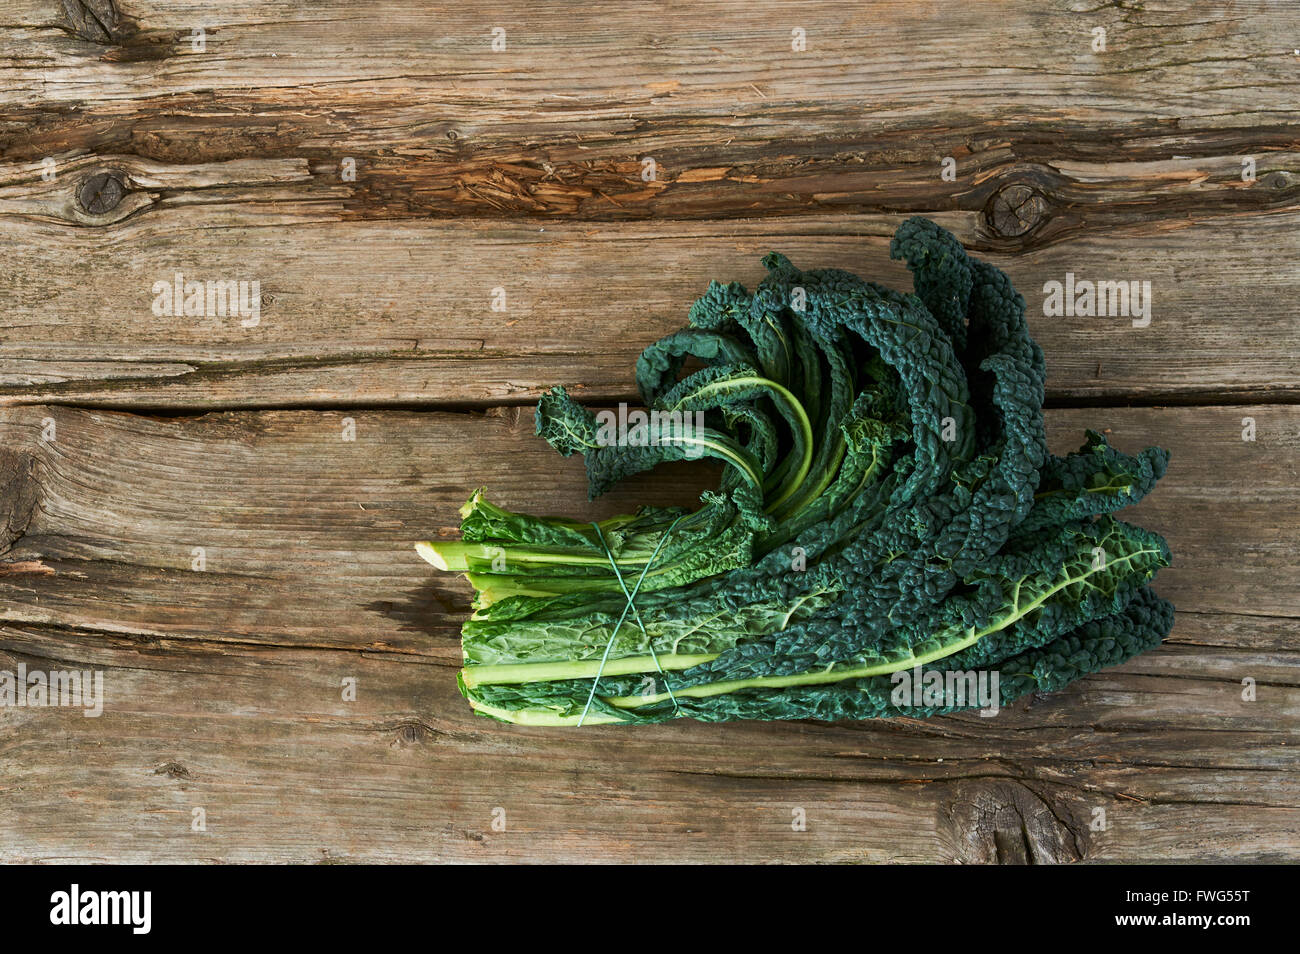 A delicious vegetables, the Kale or leaf cabbage on an old wooden table Stock Photo